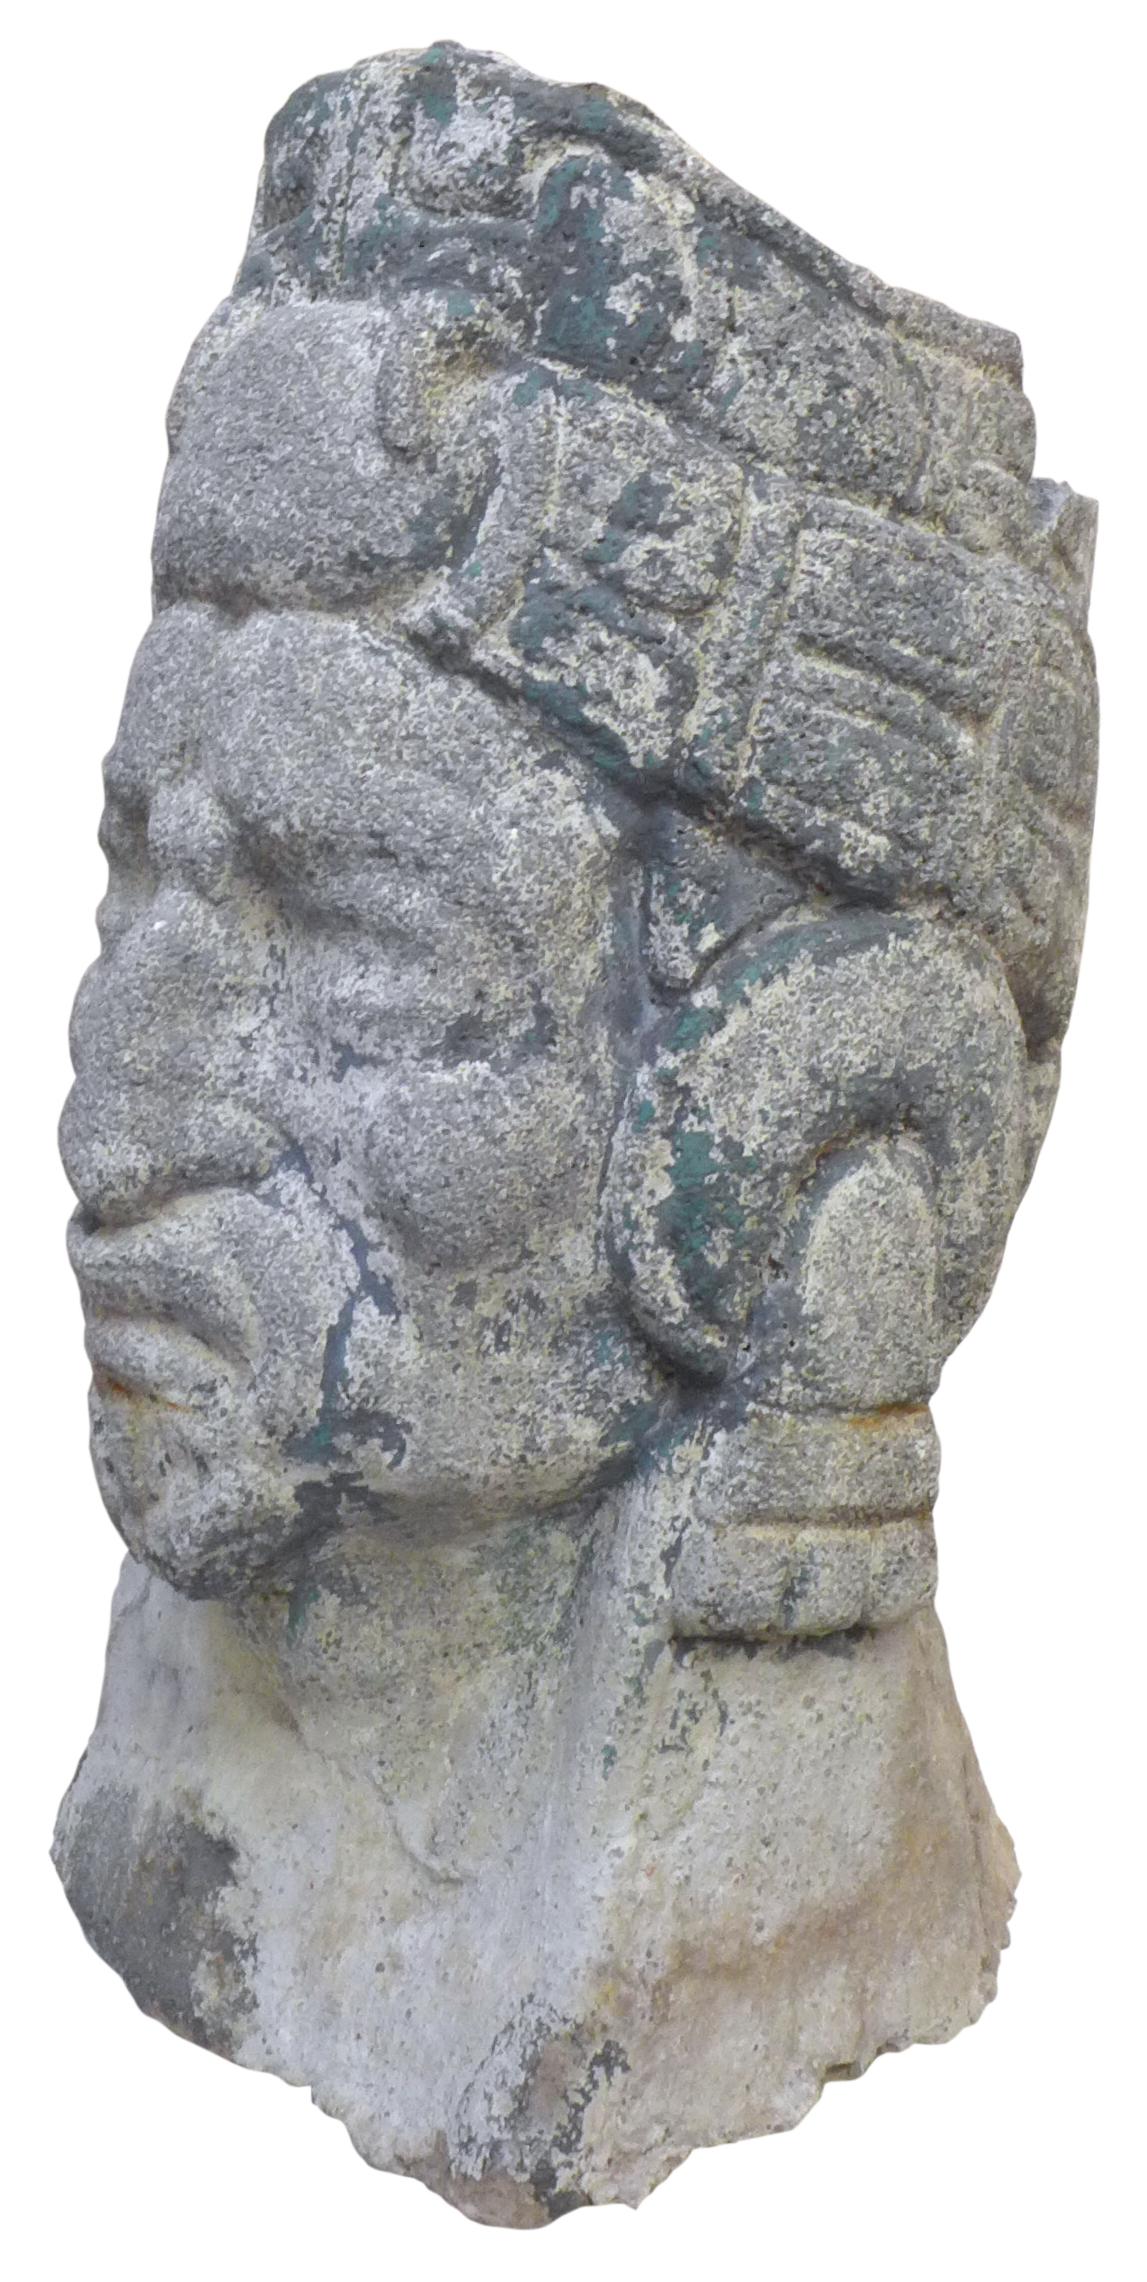 A wonderful cast stone Pre-Columbian bust planter. Great scale and execution, beautifully rendered with ethnographic details all around. Powerful presence; structurally strong with desired wear and loss from years of life outdoors. Retains sparse